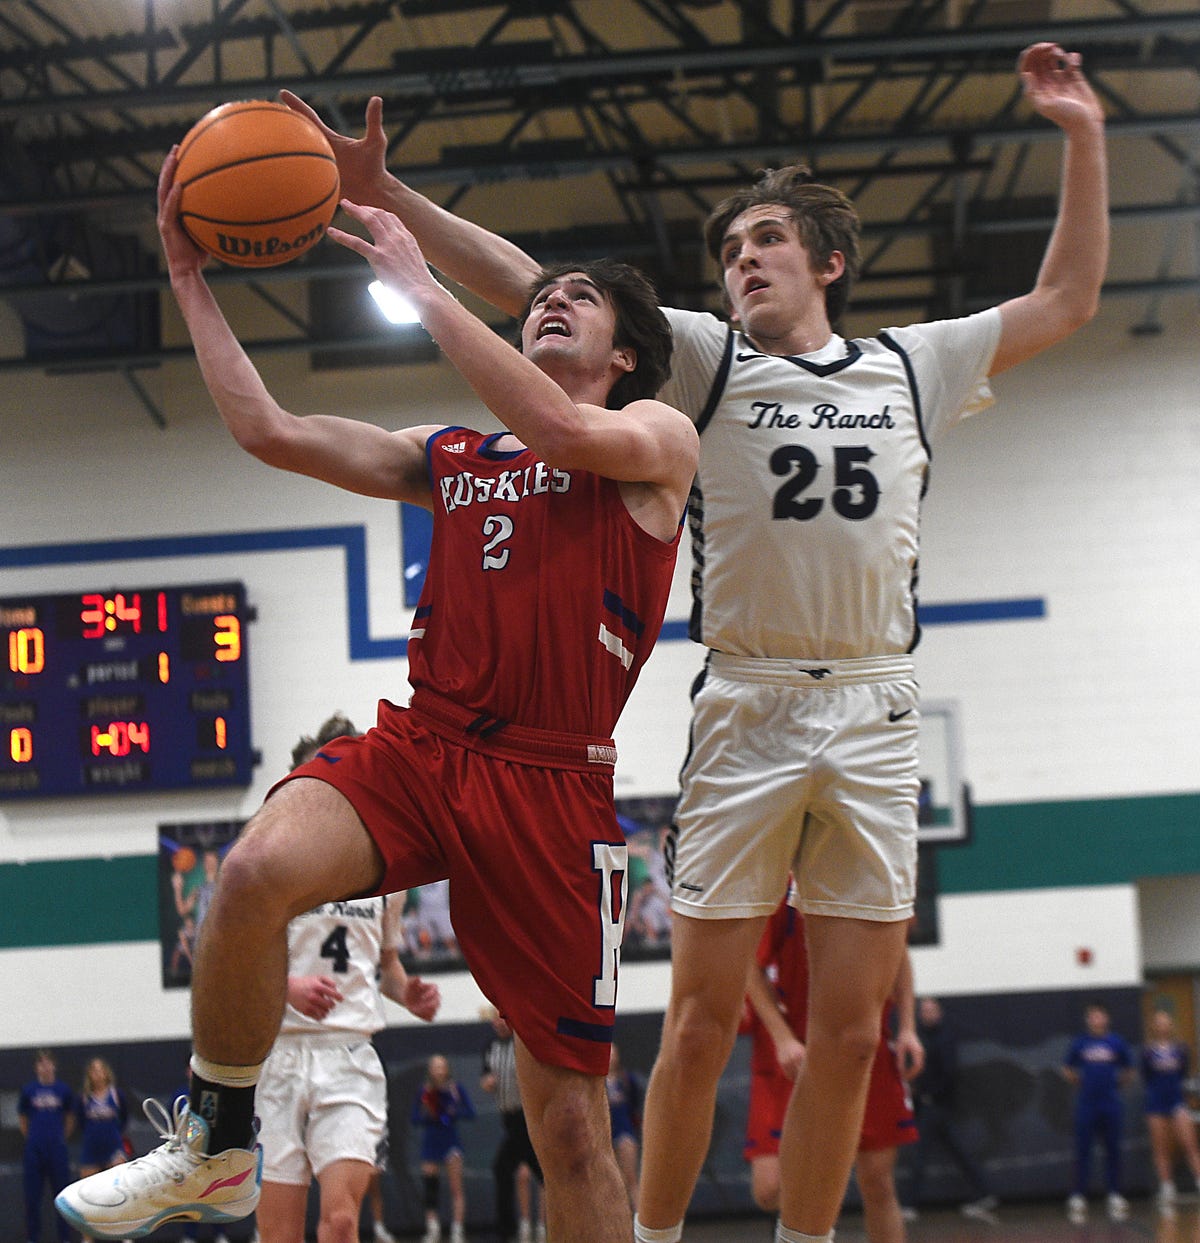 Damonte Ranch Clinches Top Seed in Boys Basketball 4A-North Regional Tournament